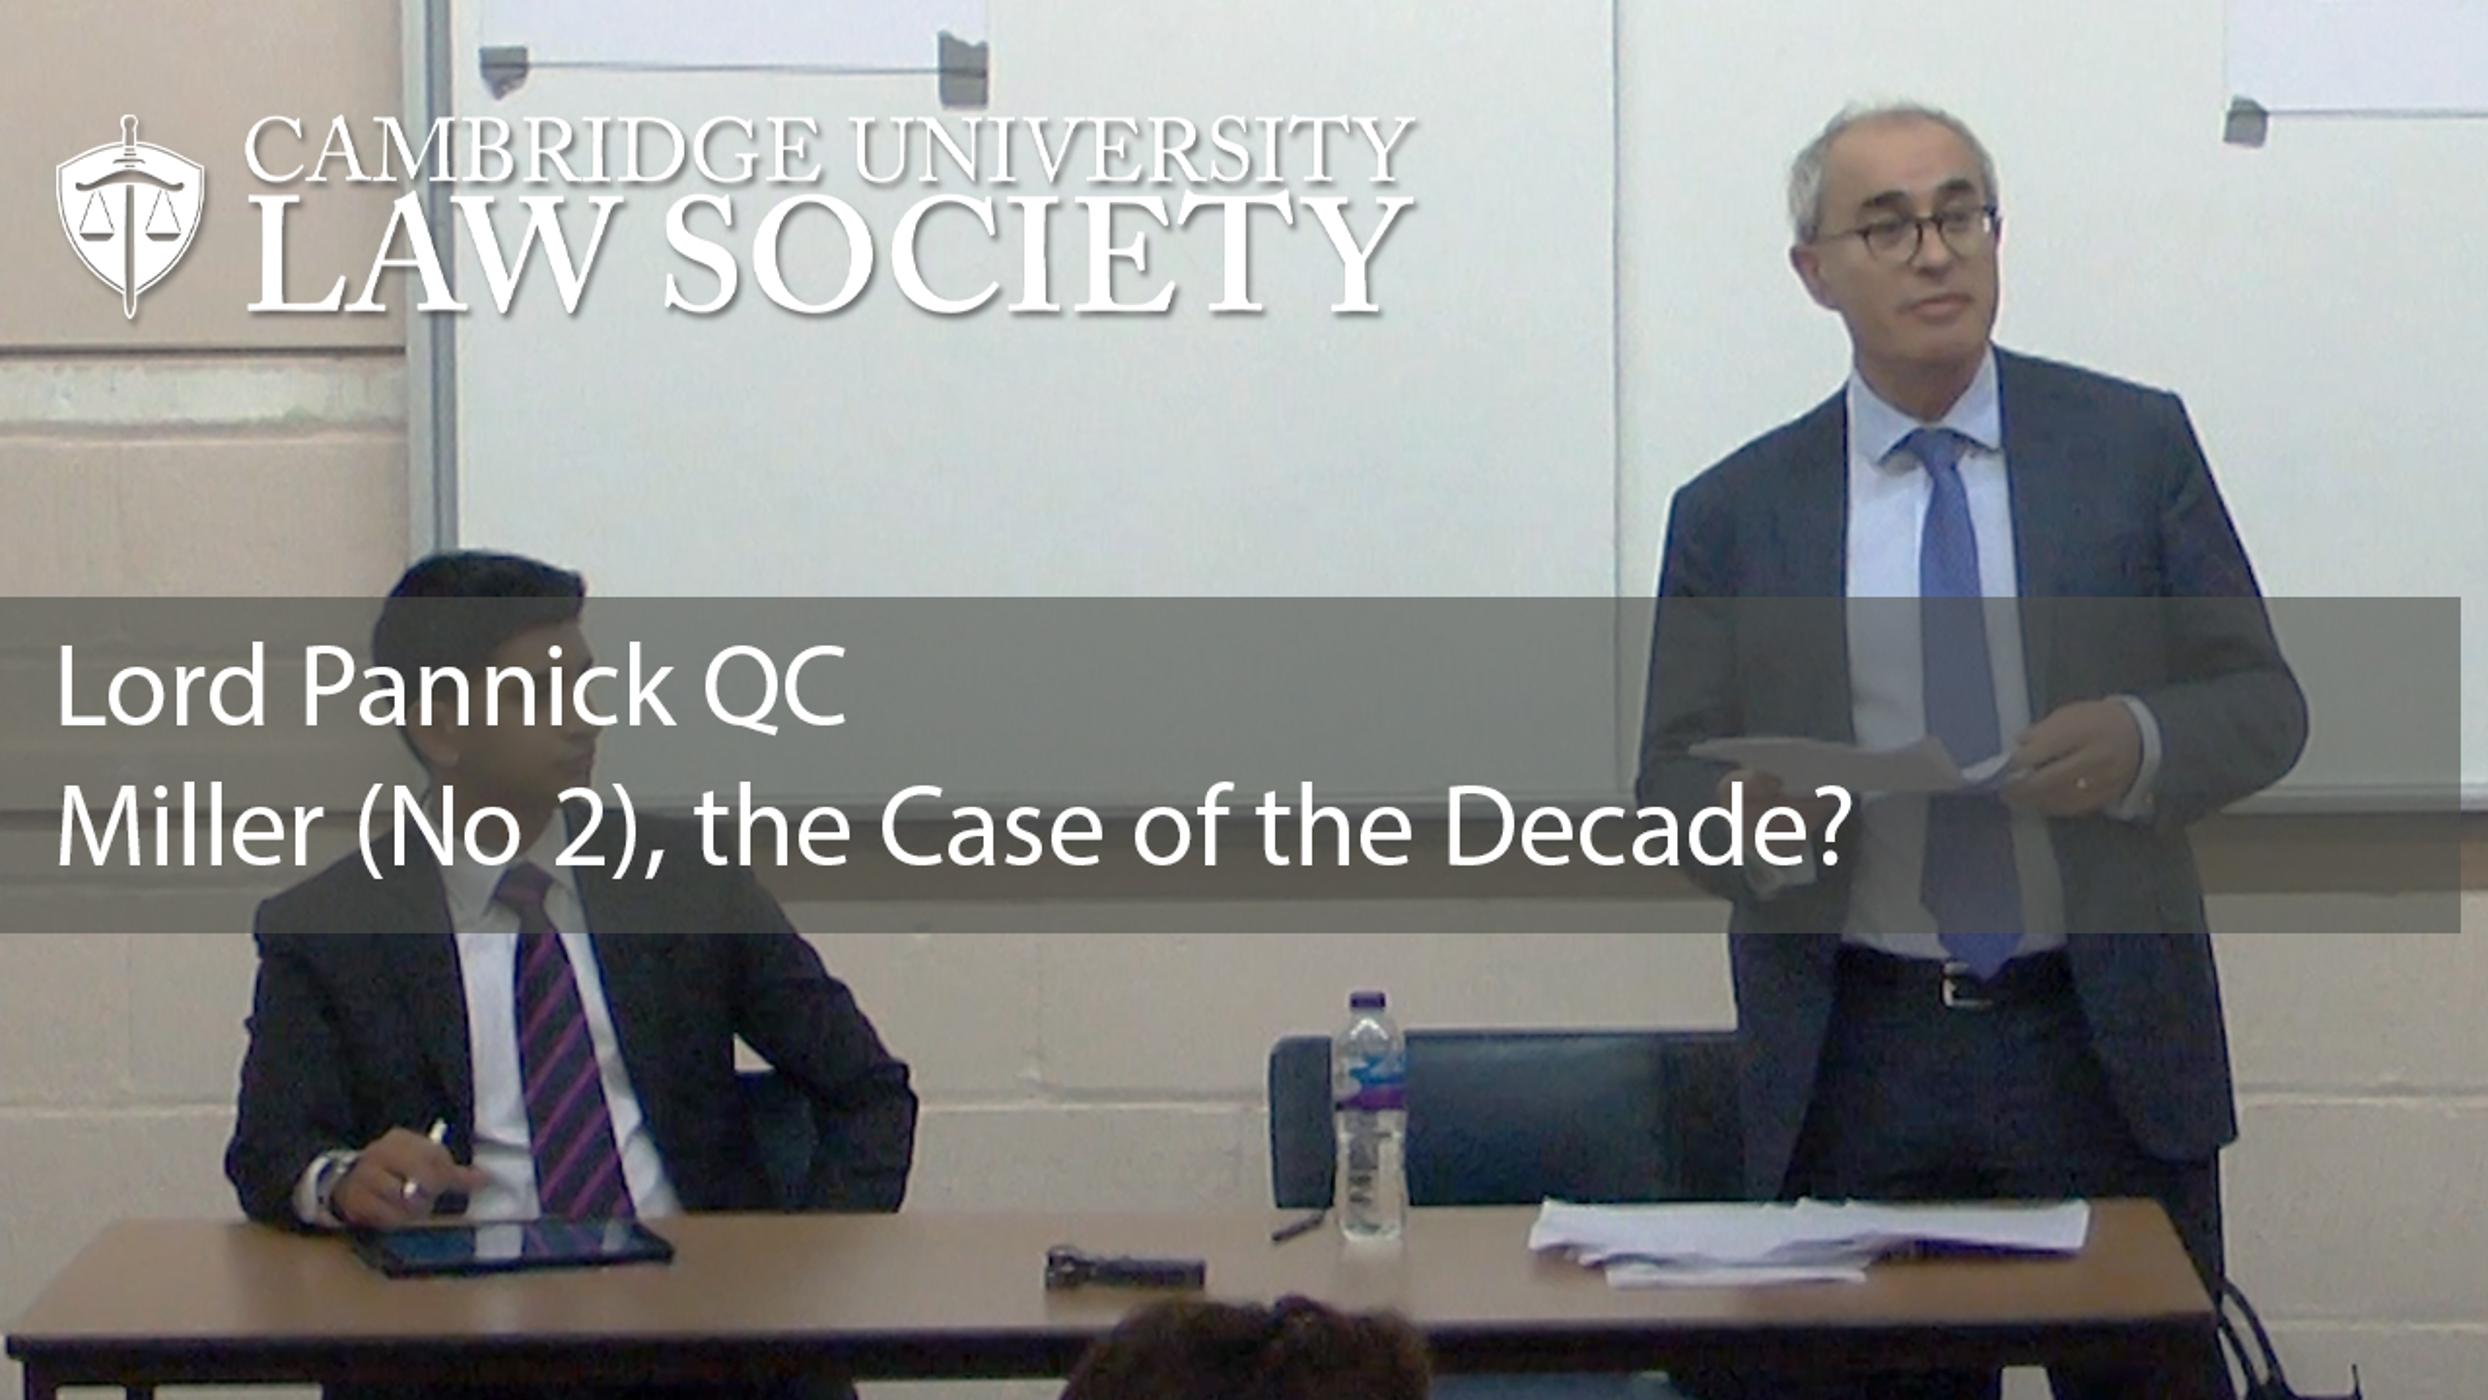 'Miller (No 2), the Case of the Decade?' - Lord Pannick QC: CULS Lecture (audio)